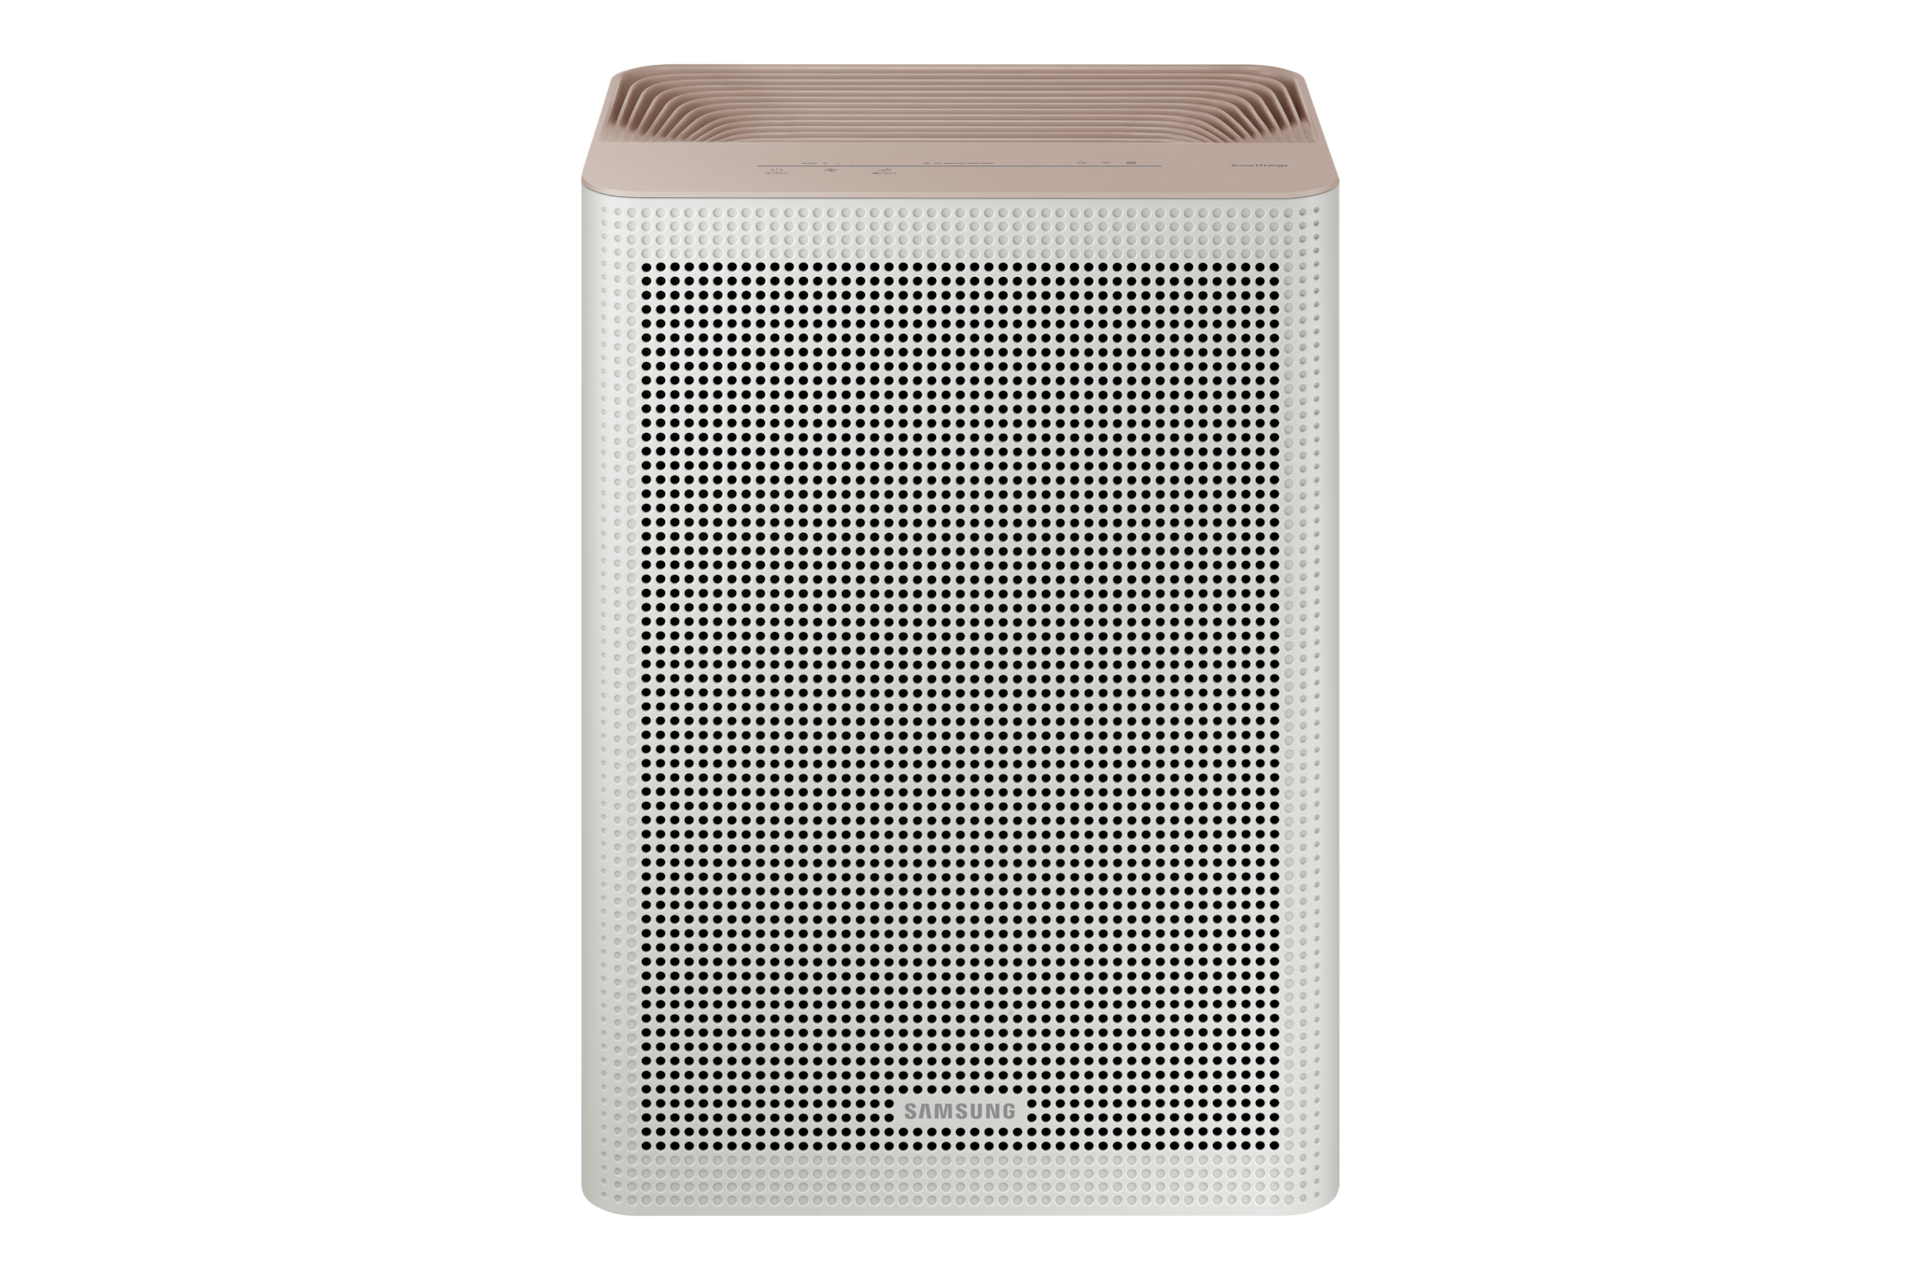 Buy Samsung Smart Air Purifier 40m2 in Clay Beige at the latest prices in Malaysia